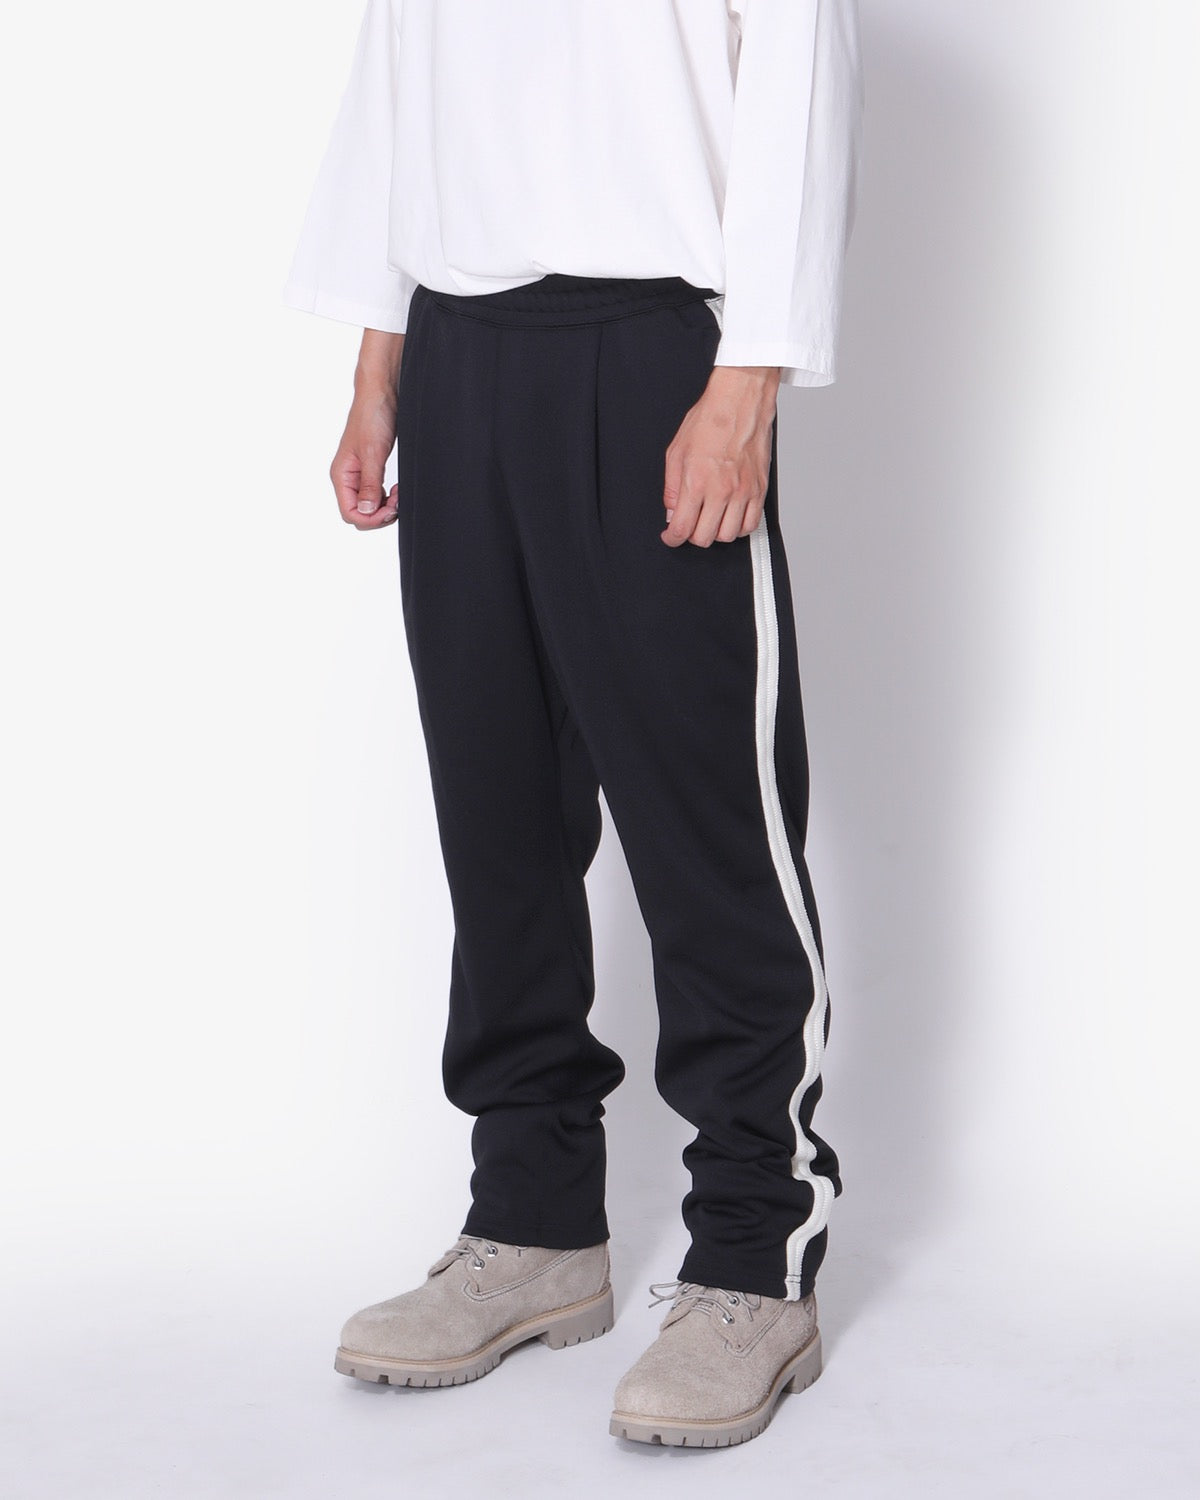 COACH EASY PANTS POLY JERSEY